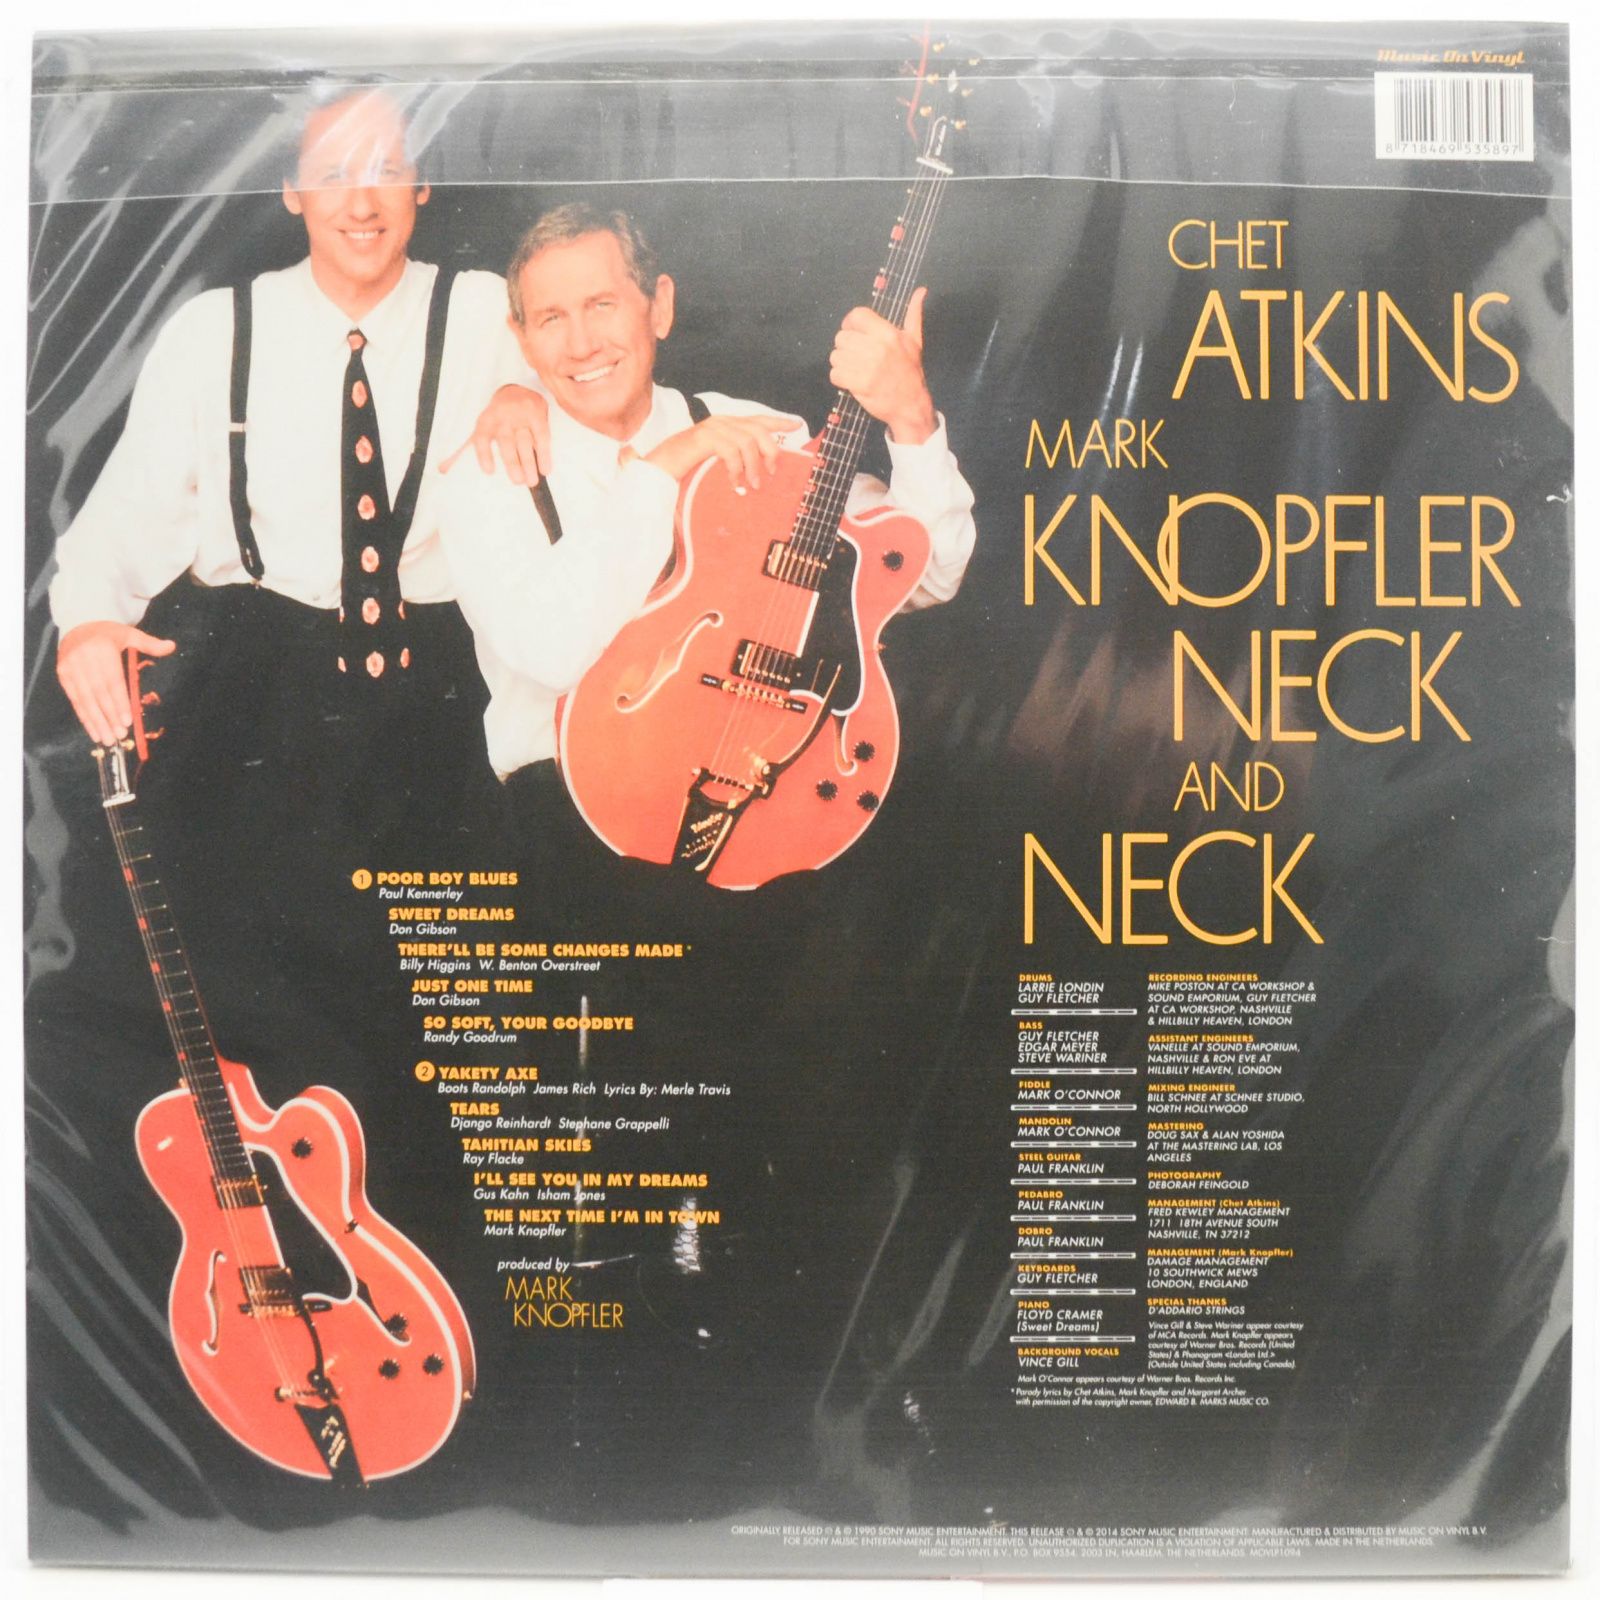 Chet Atkins And Mark Knopfler — Neck And Neck, 1990